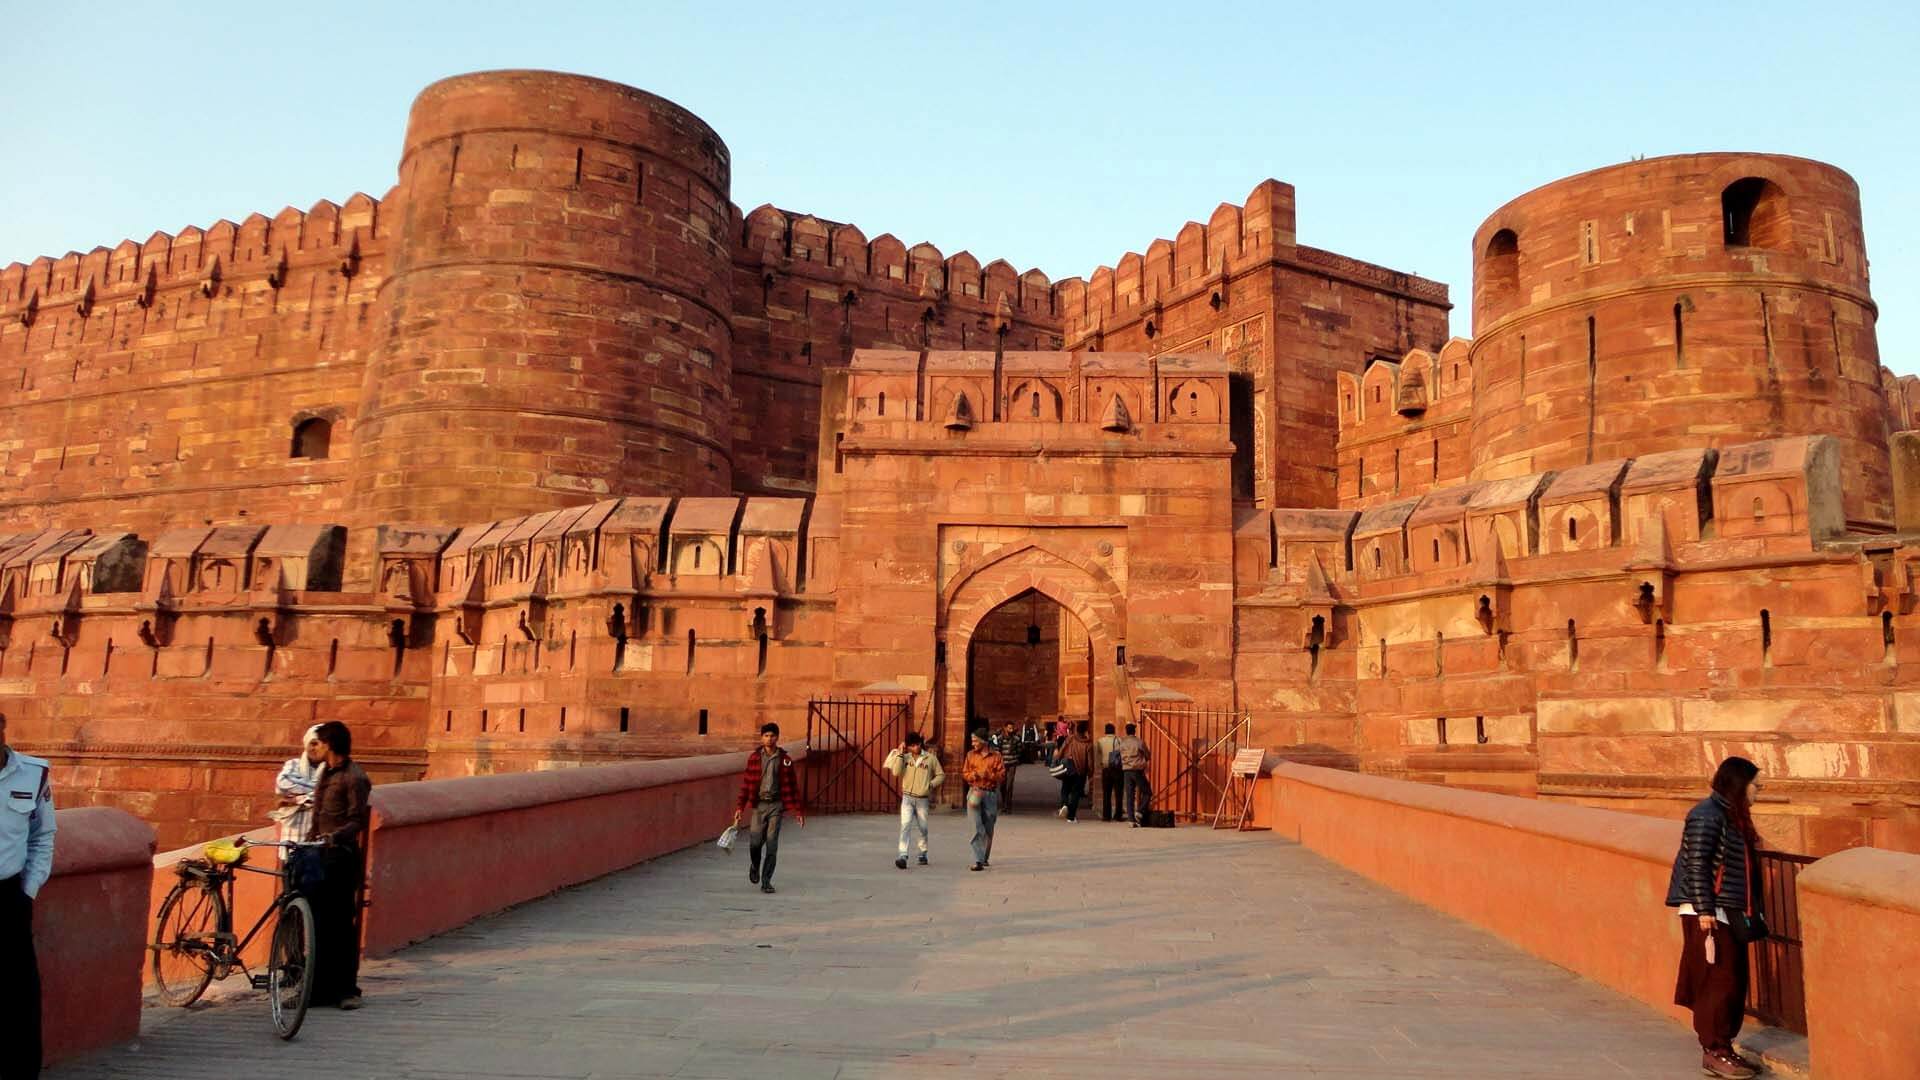 Agra sightseeing Taxi Service with Fatehpur Sikri